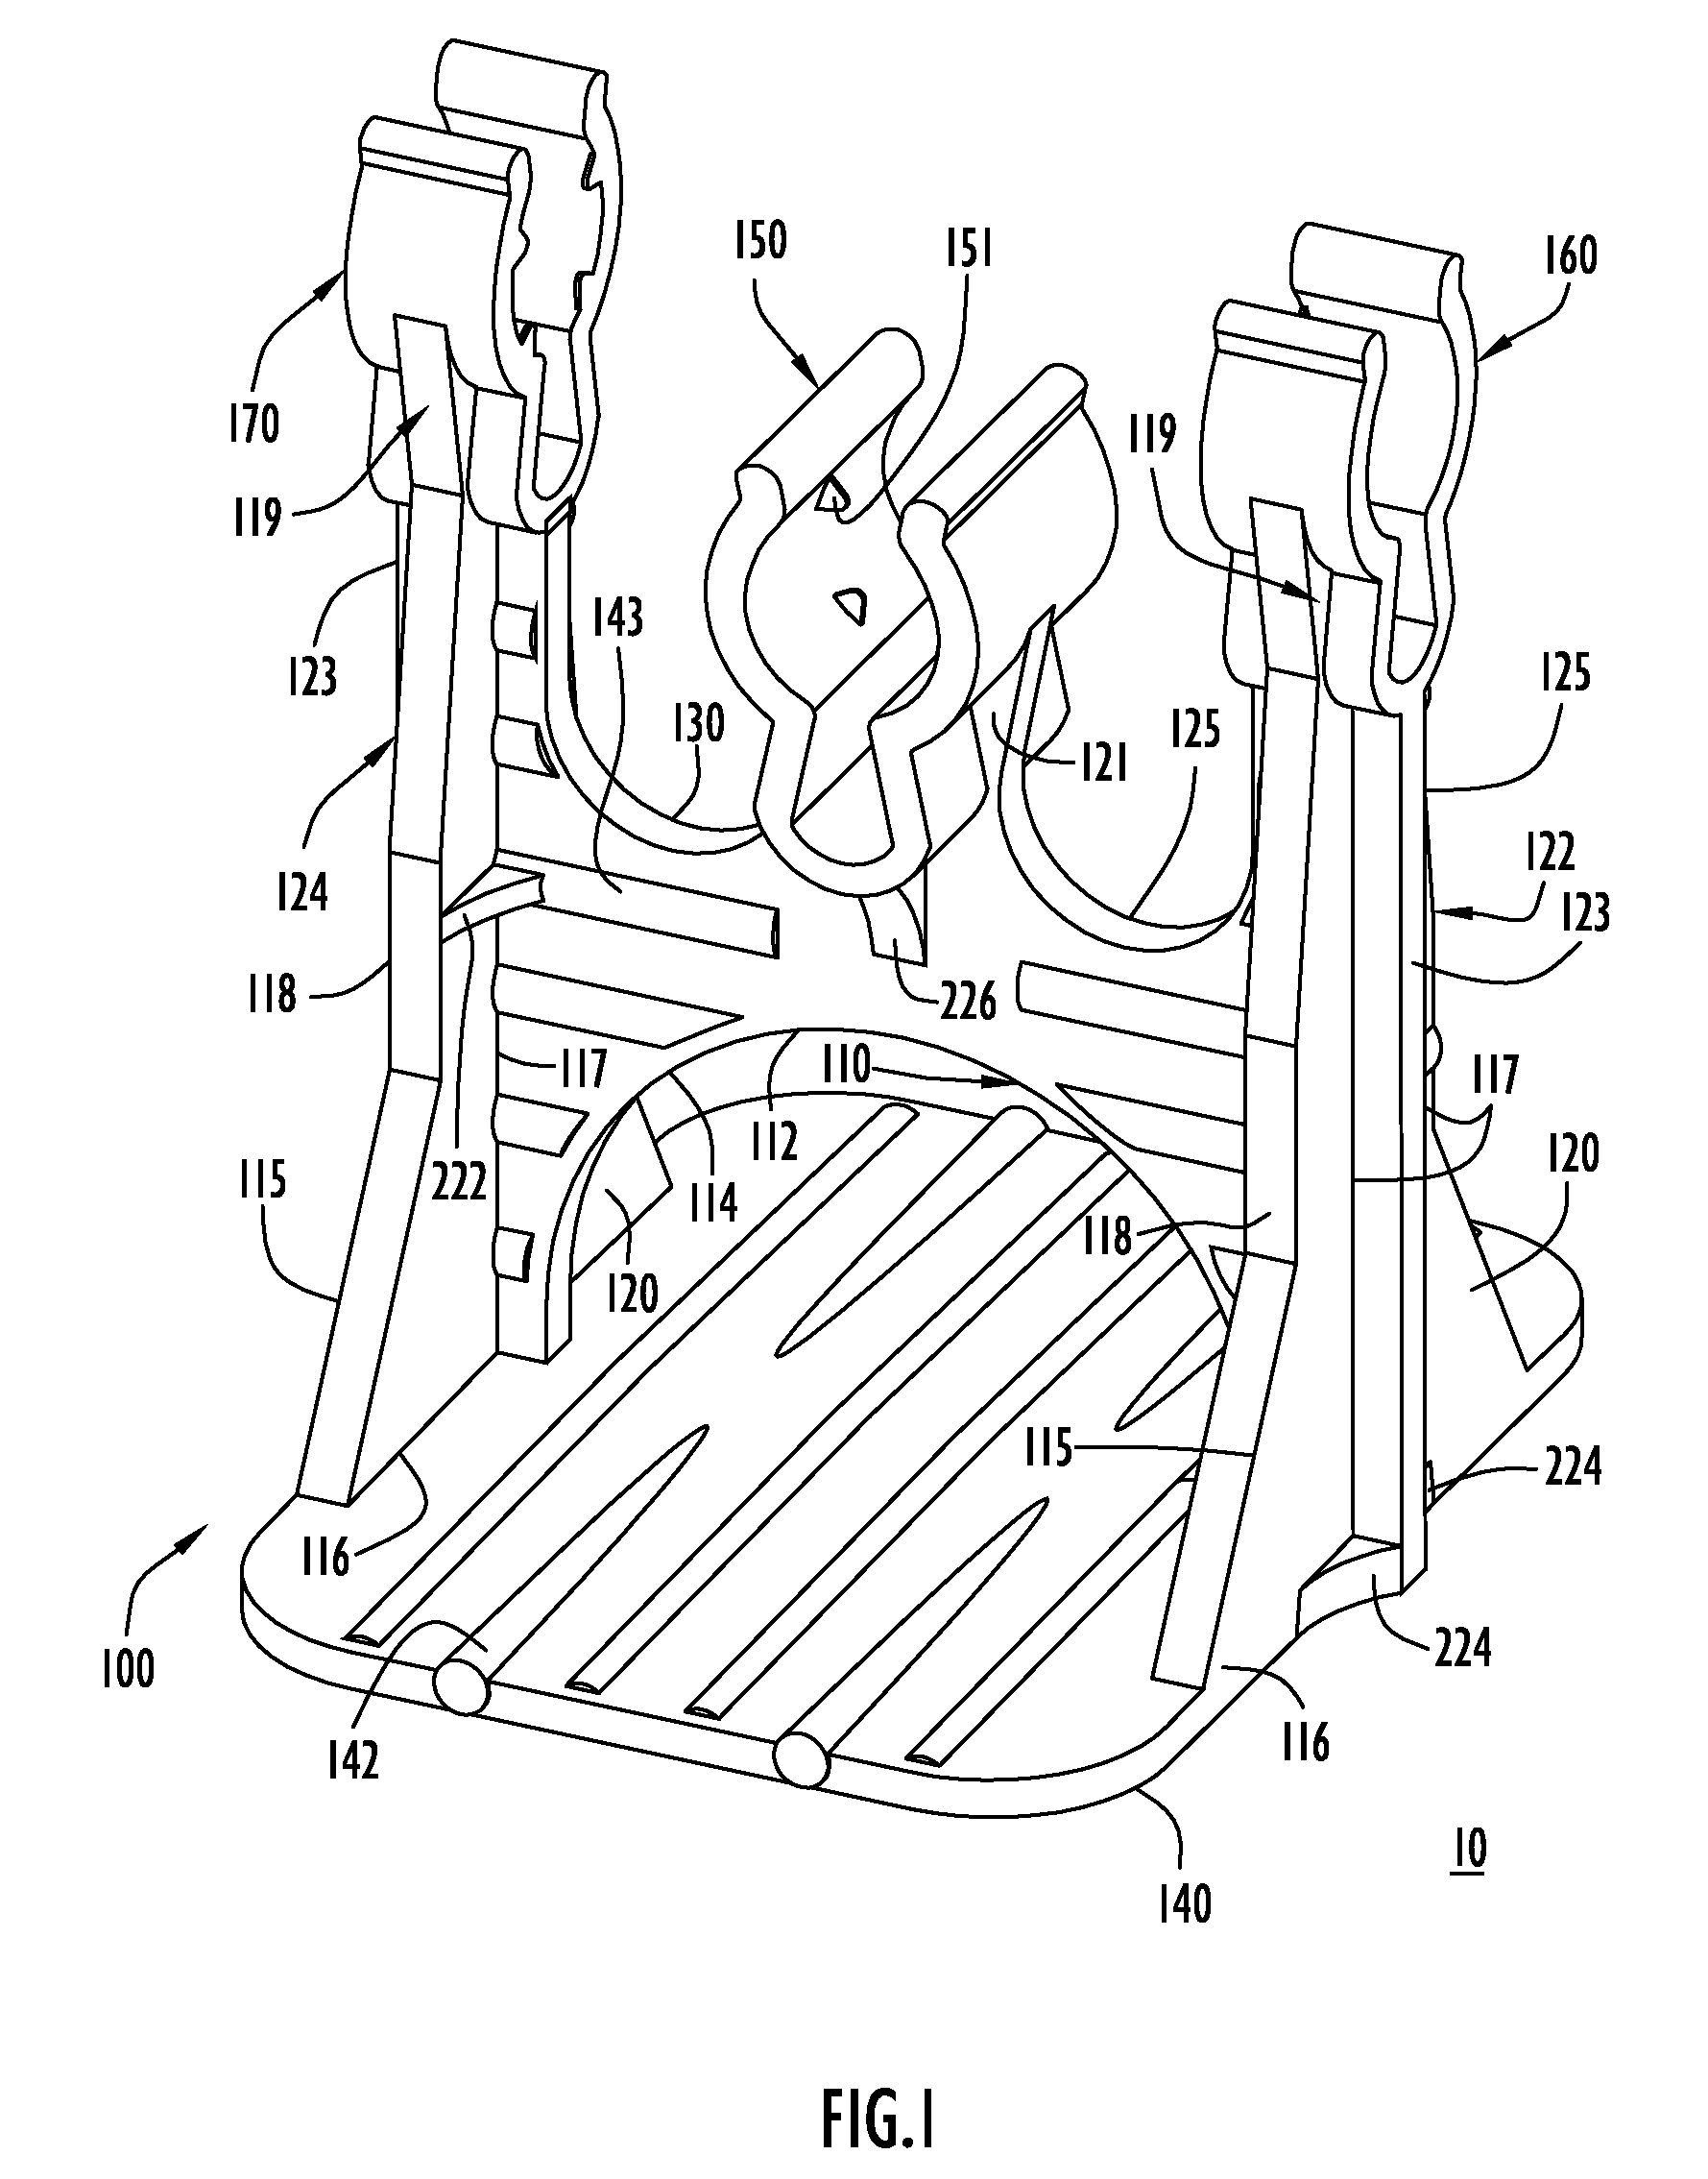 Method and apparatus for positioning reinforcing members within hardened material structures